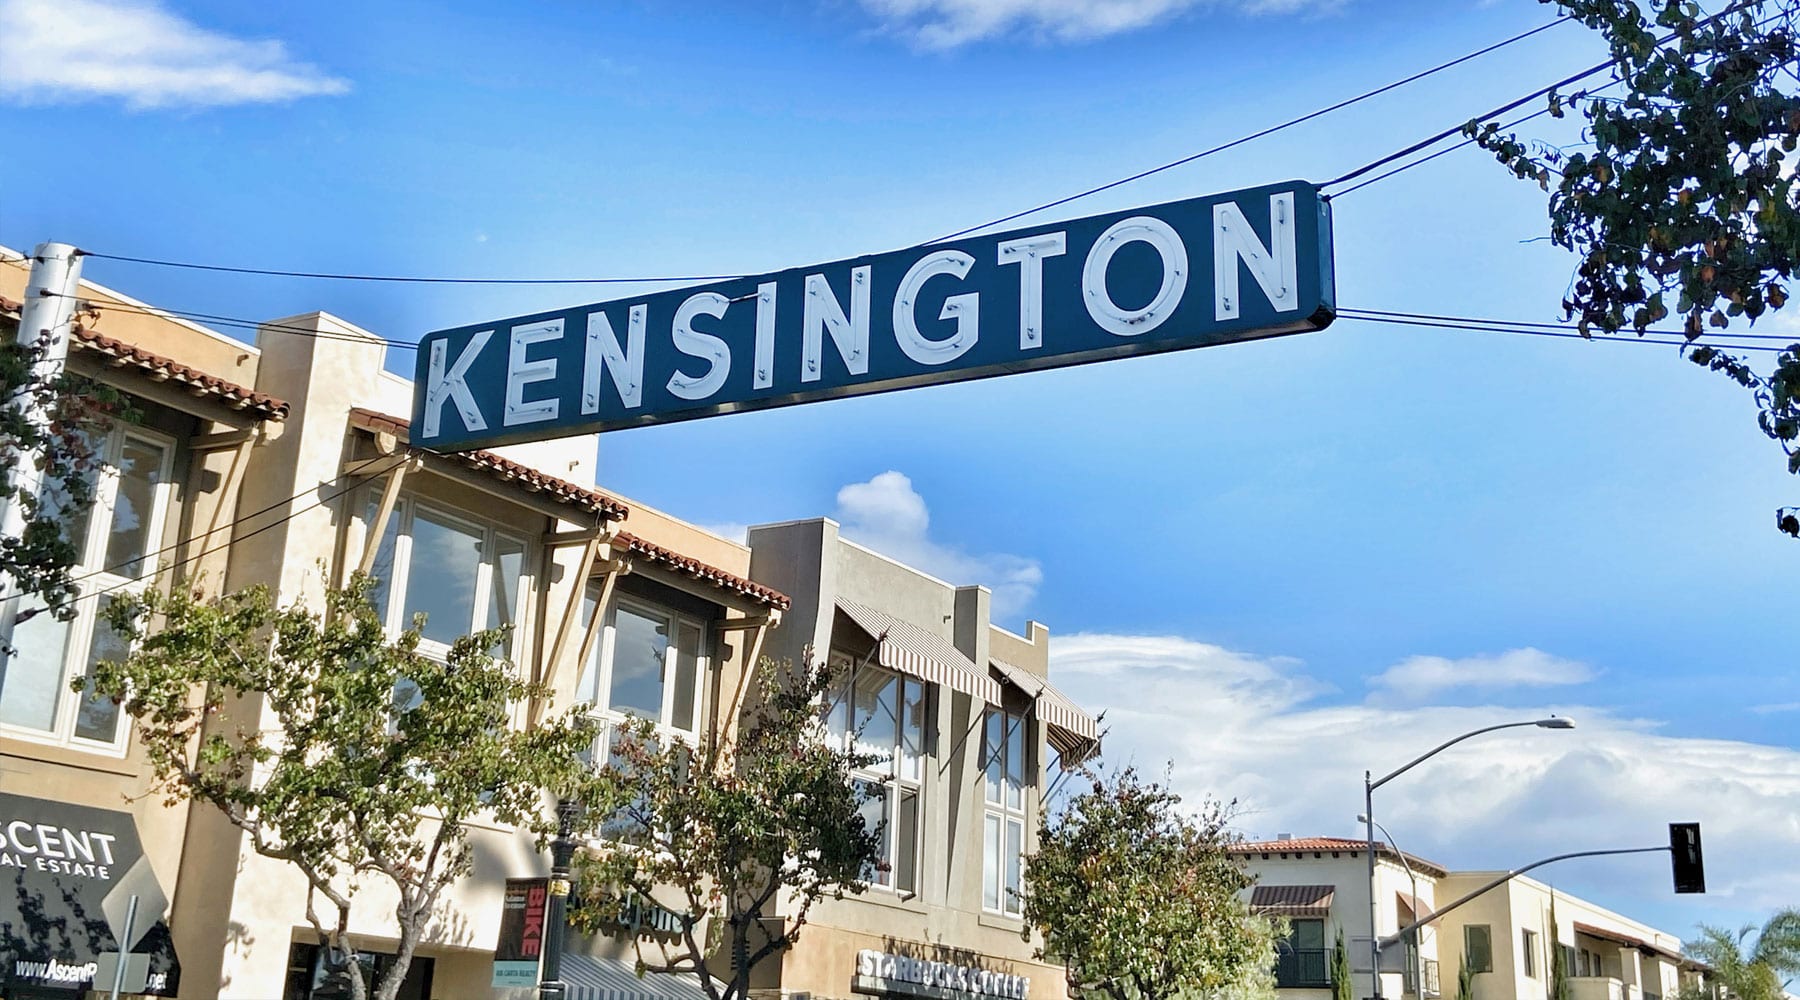 Kensington: Get to Know This Cute ‘Hood